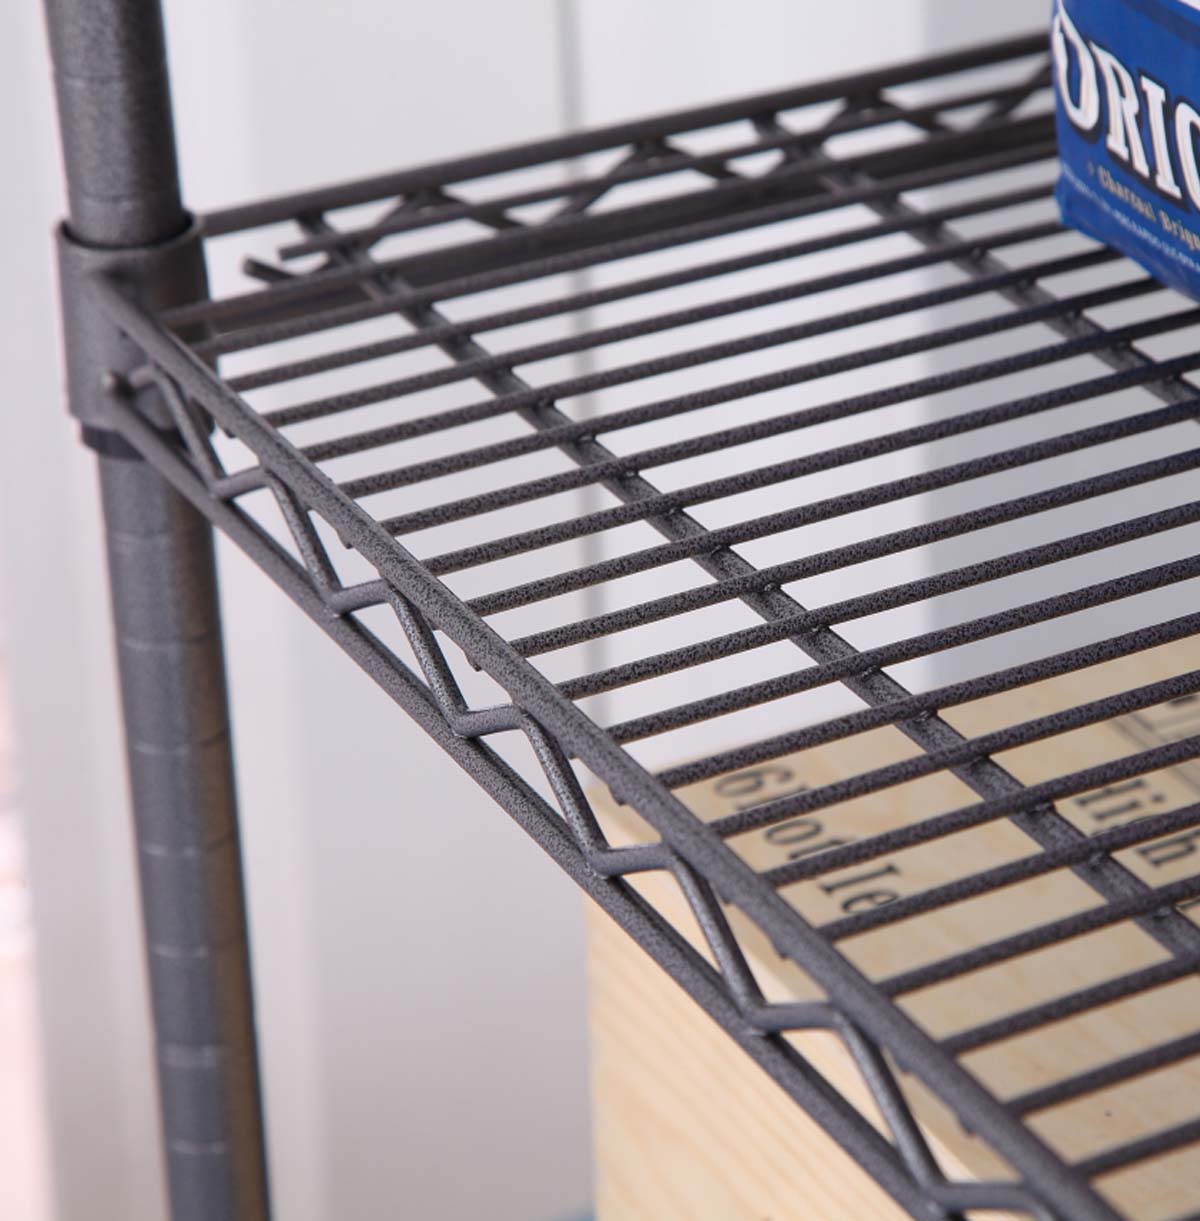 Drawer mold shelf structure features.wire shelving unit 30 inches wide